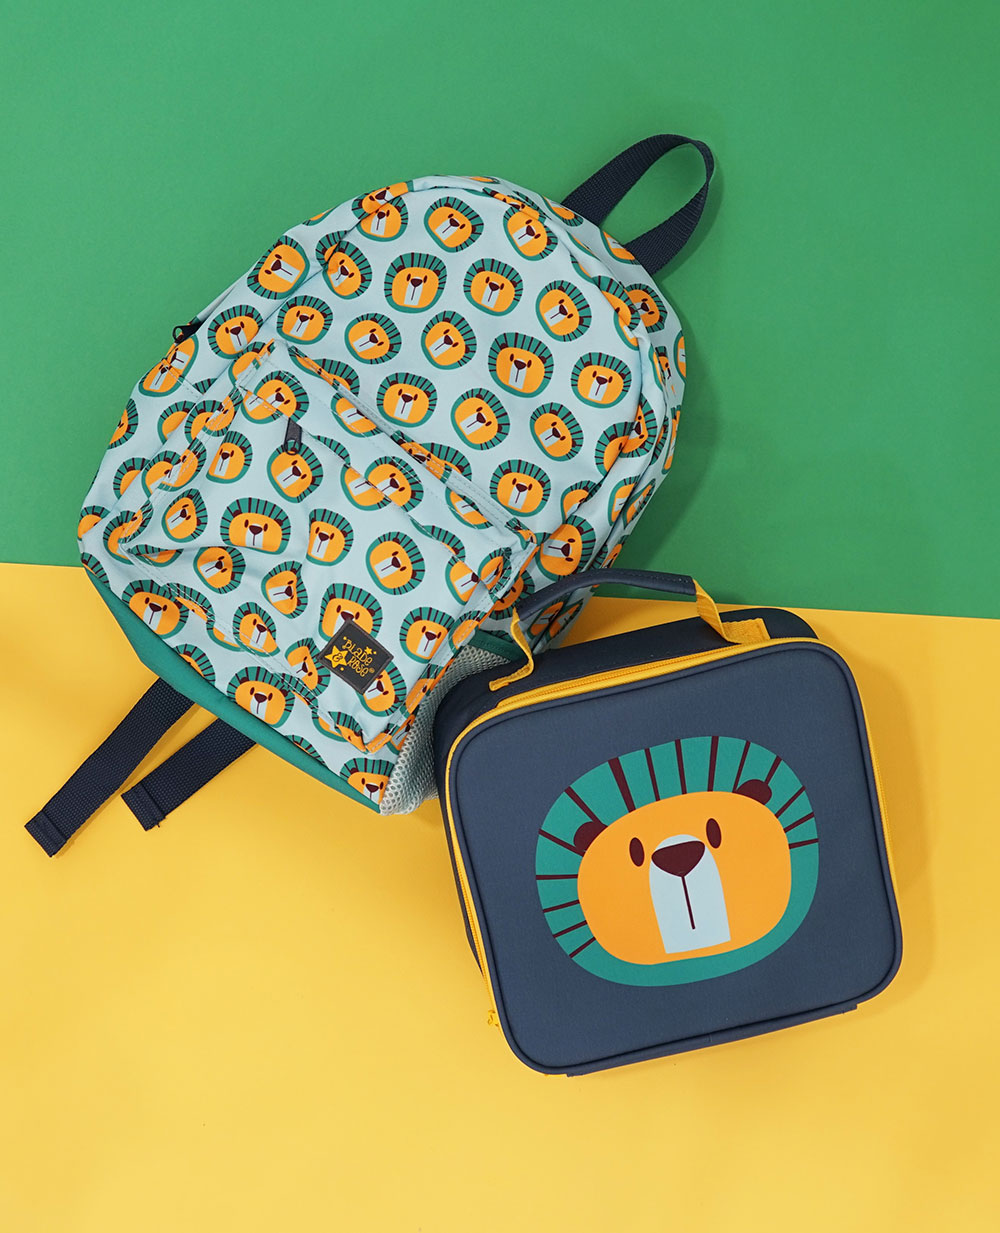 Back pack and lunchbox with a Frankie the lion pattern on them